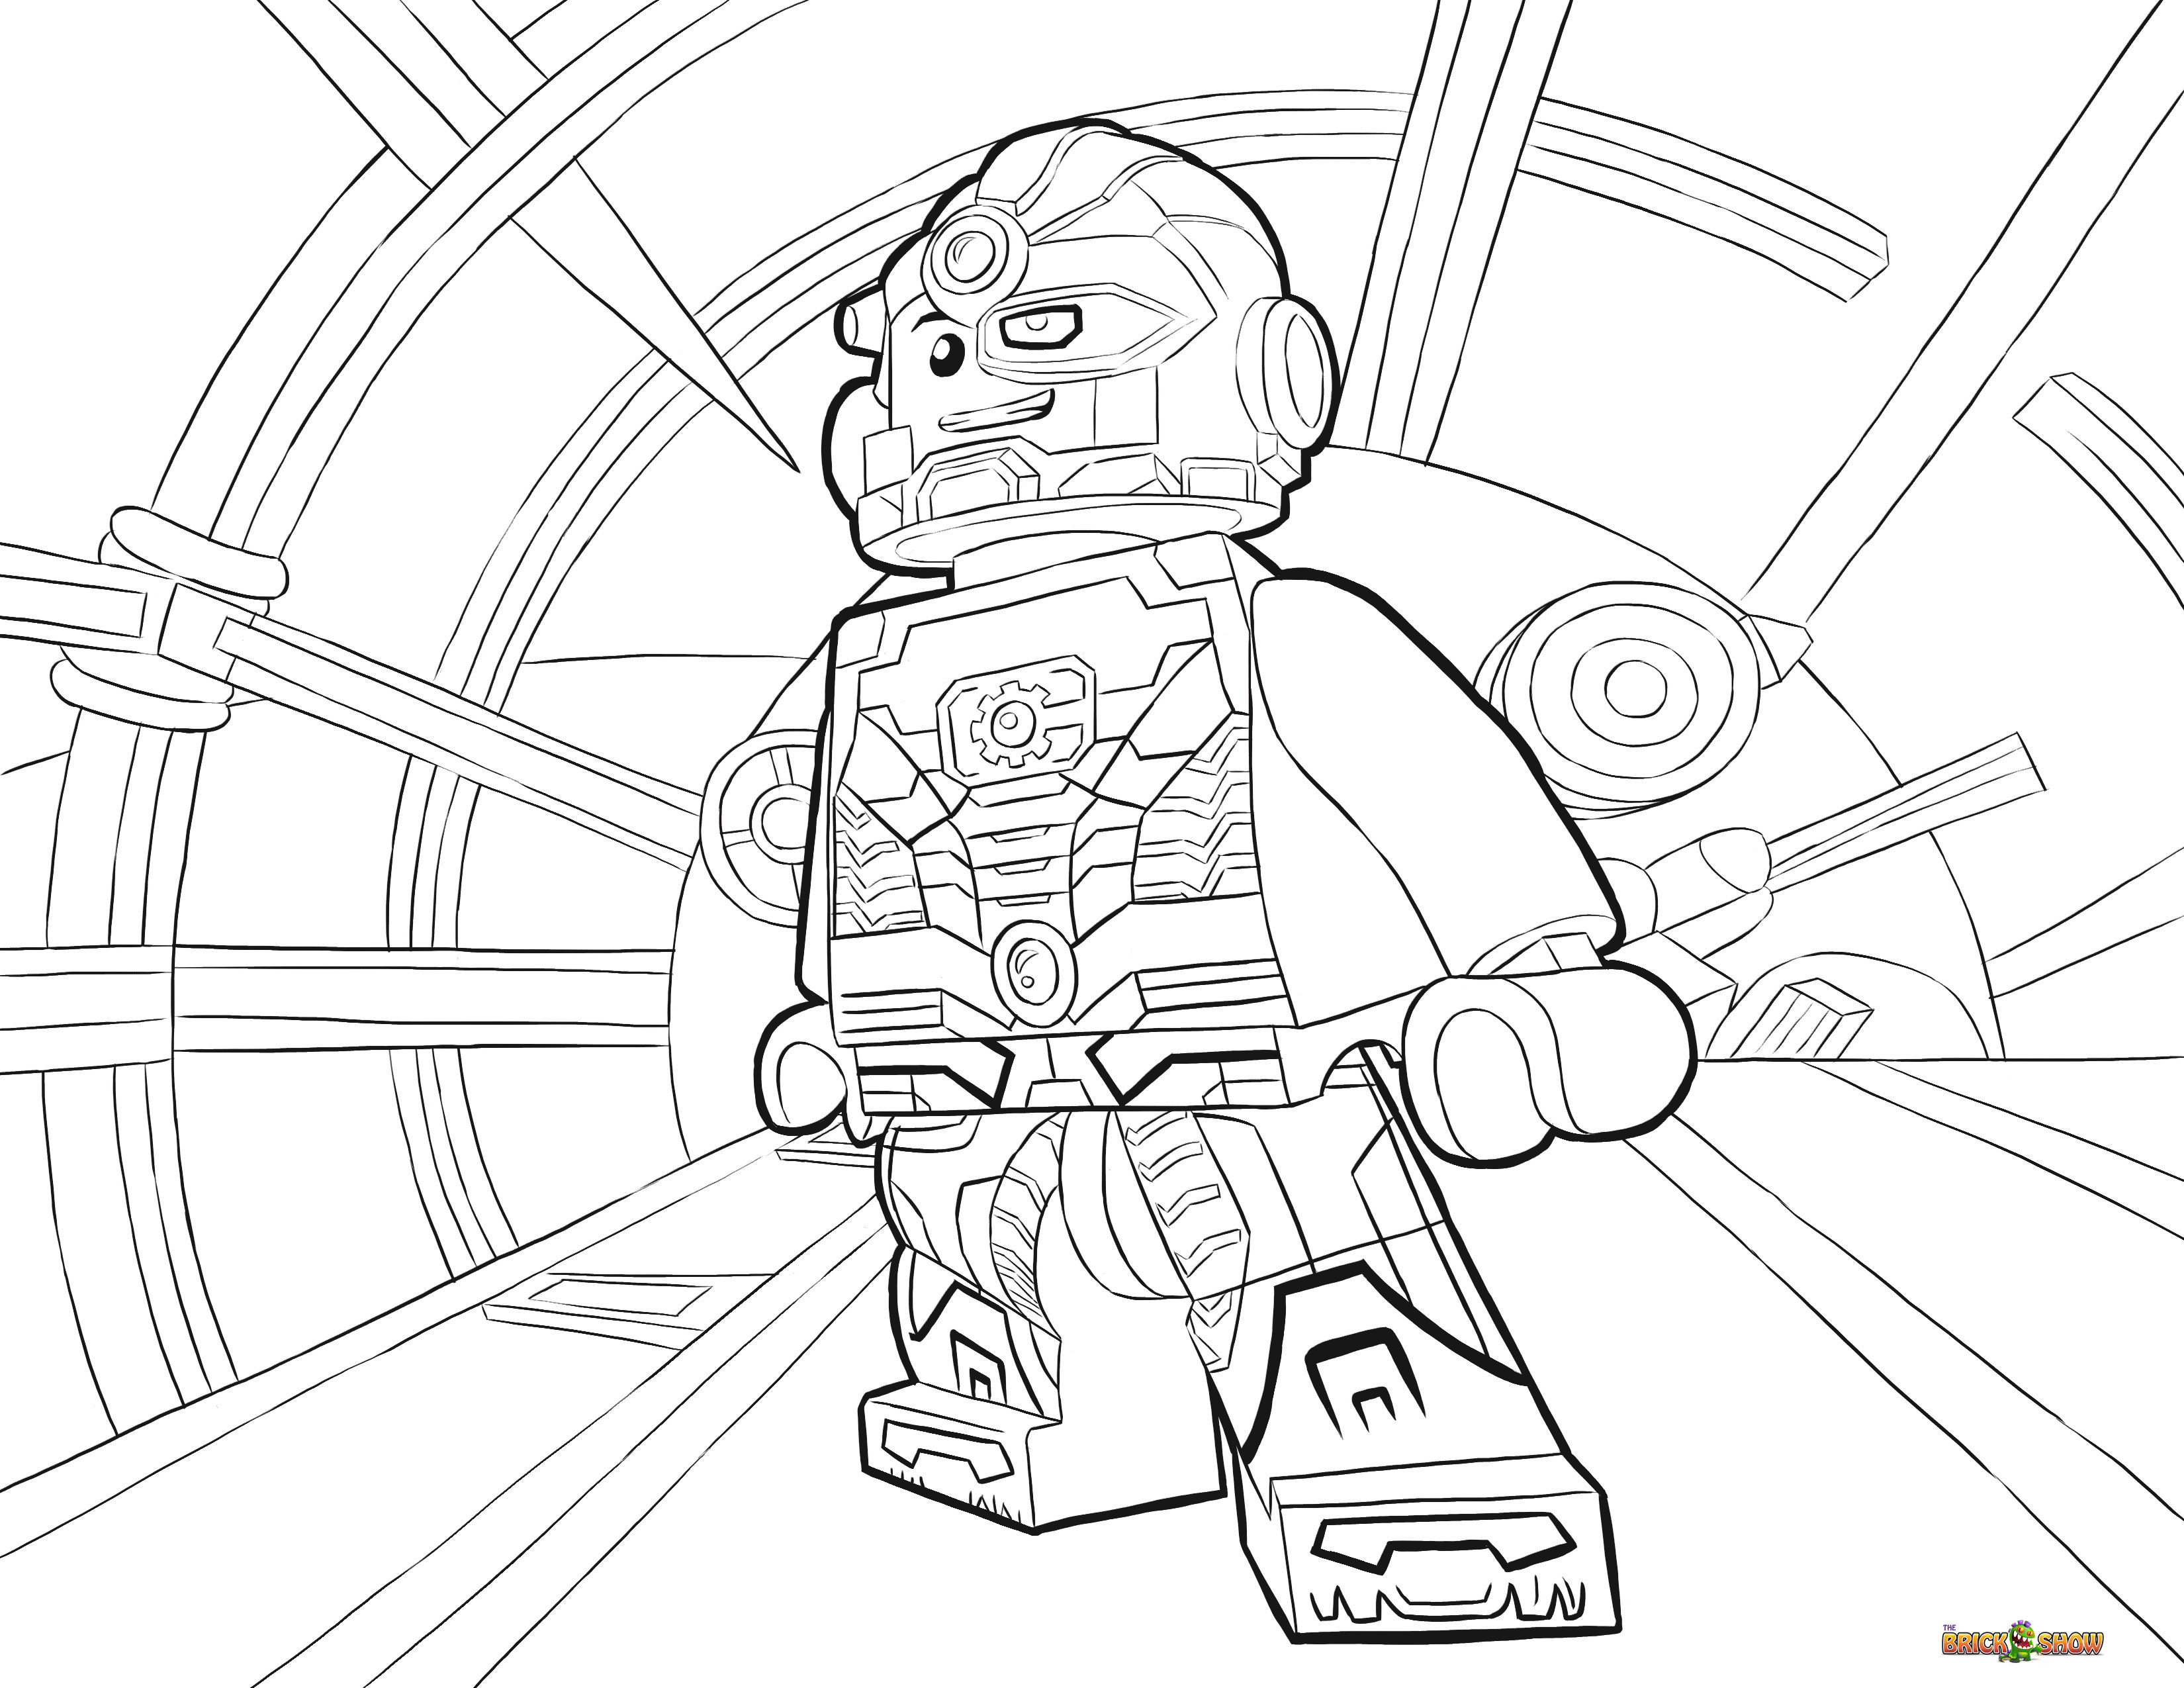 LEGO DC Universe Super Heroes Coloring Pages Free Printable LEGO